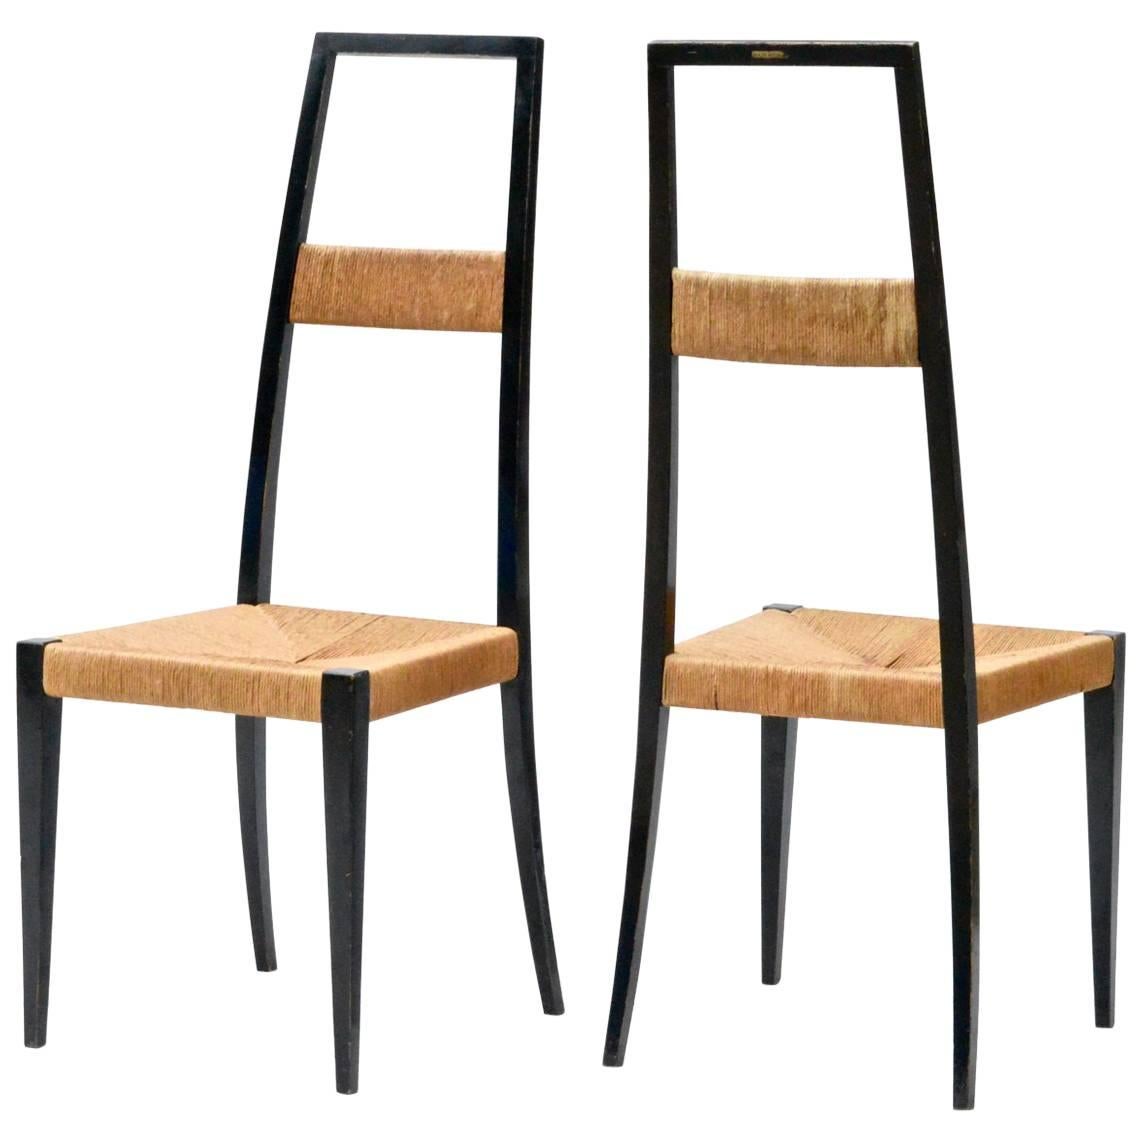 Italian Designed High Back Chairs in the Manner of Gio Ponti